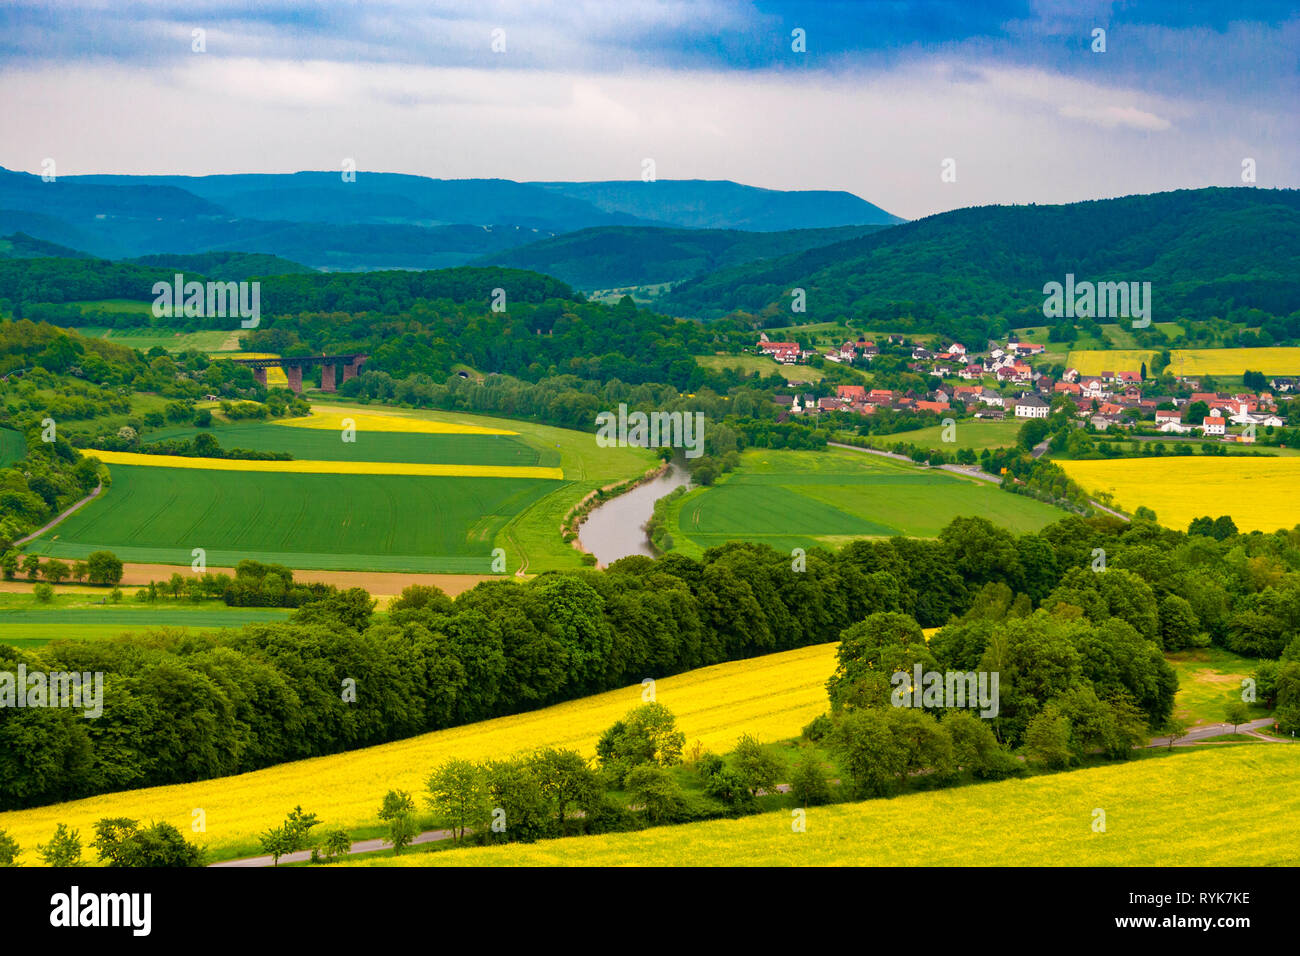 A great landscape view of the Werra Valley with the river Werra, cultivated fields, a railway bridge and the town Oberrieden; surrounded by forest and... Stock Photo